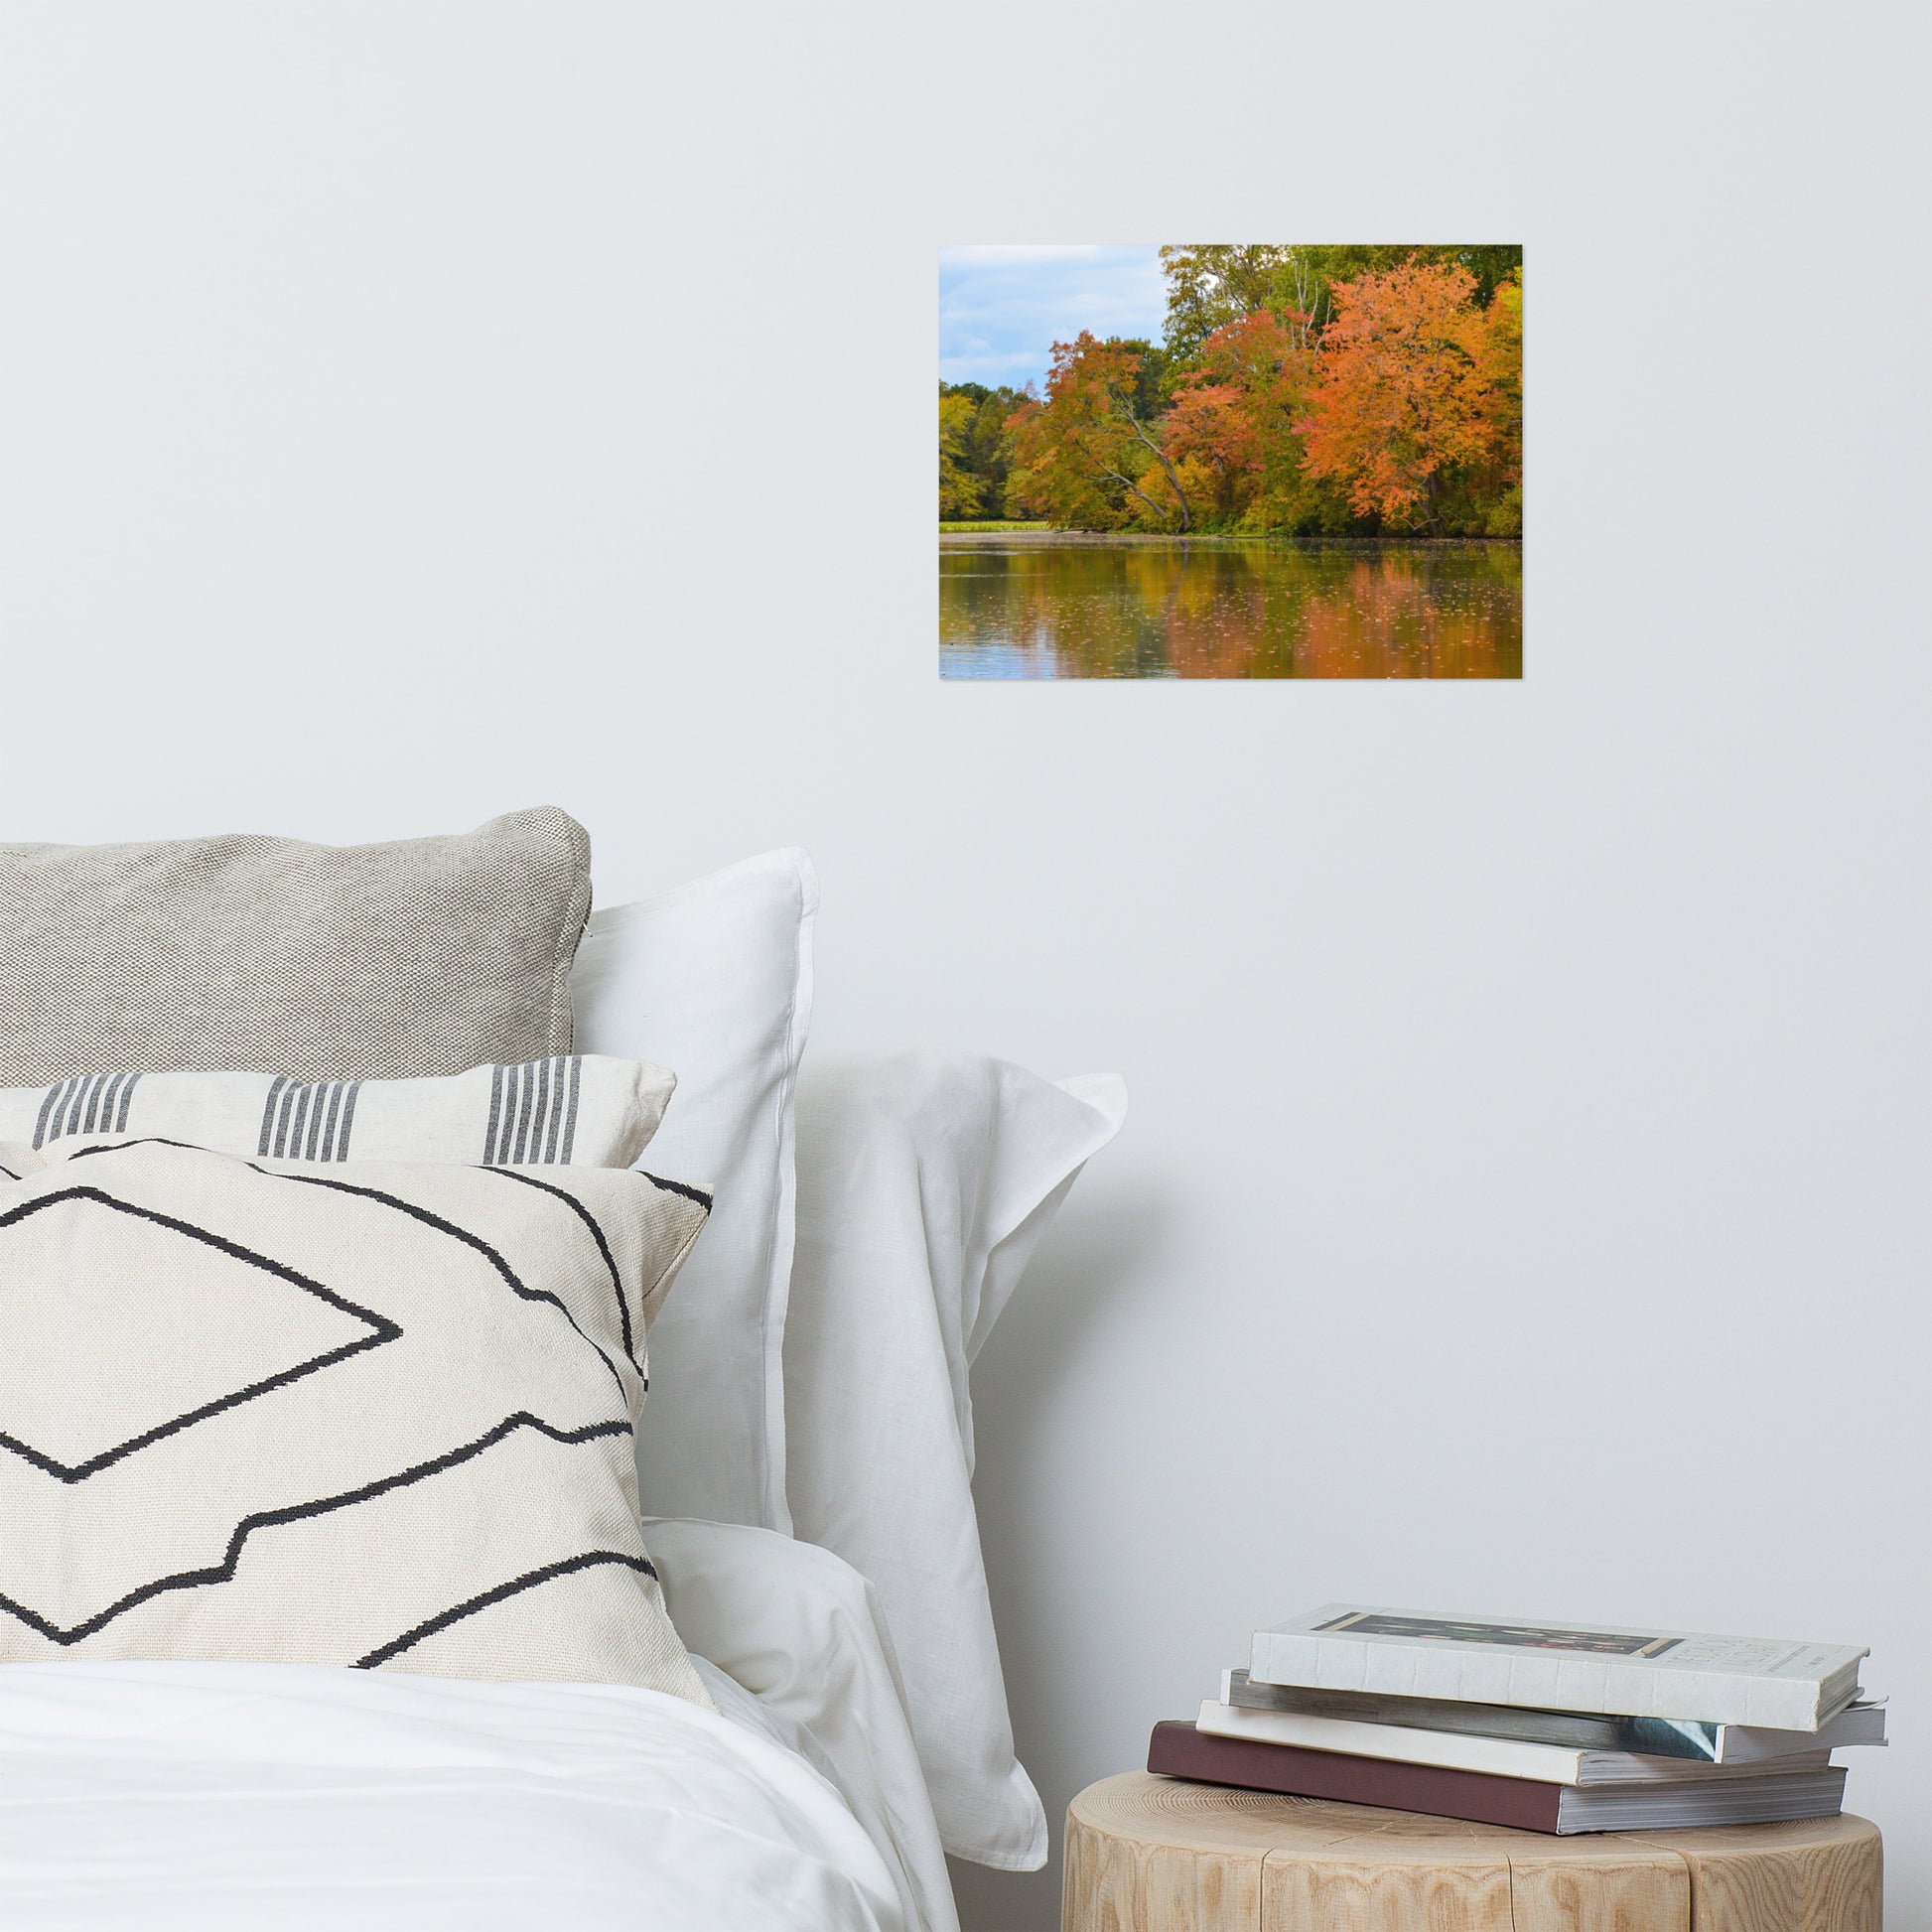 Art Above A Bed: Colorful Trees in Fall Color Edge of Pond - Rural / Country Style Landscape / Nature Loose / Unframed / Frameless / Frameable Photograph Wall Art Print - Artwork